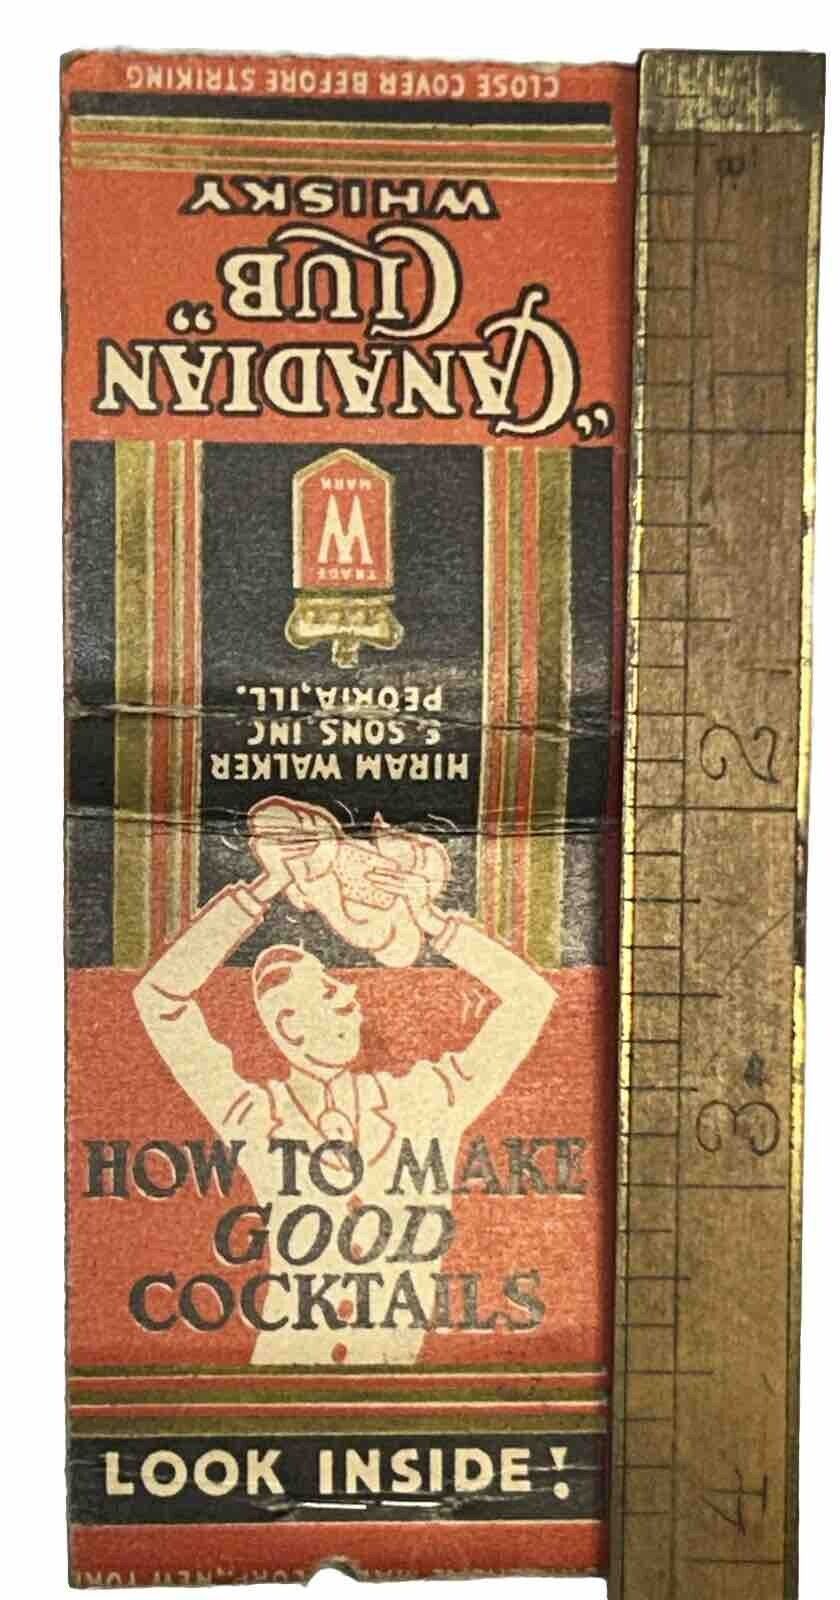 Antique Canadian Club Whisky Peoria Illinois Matchbook 1930s Cocktails Whisky